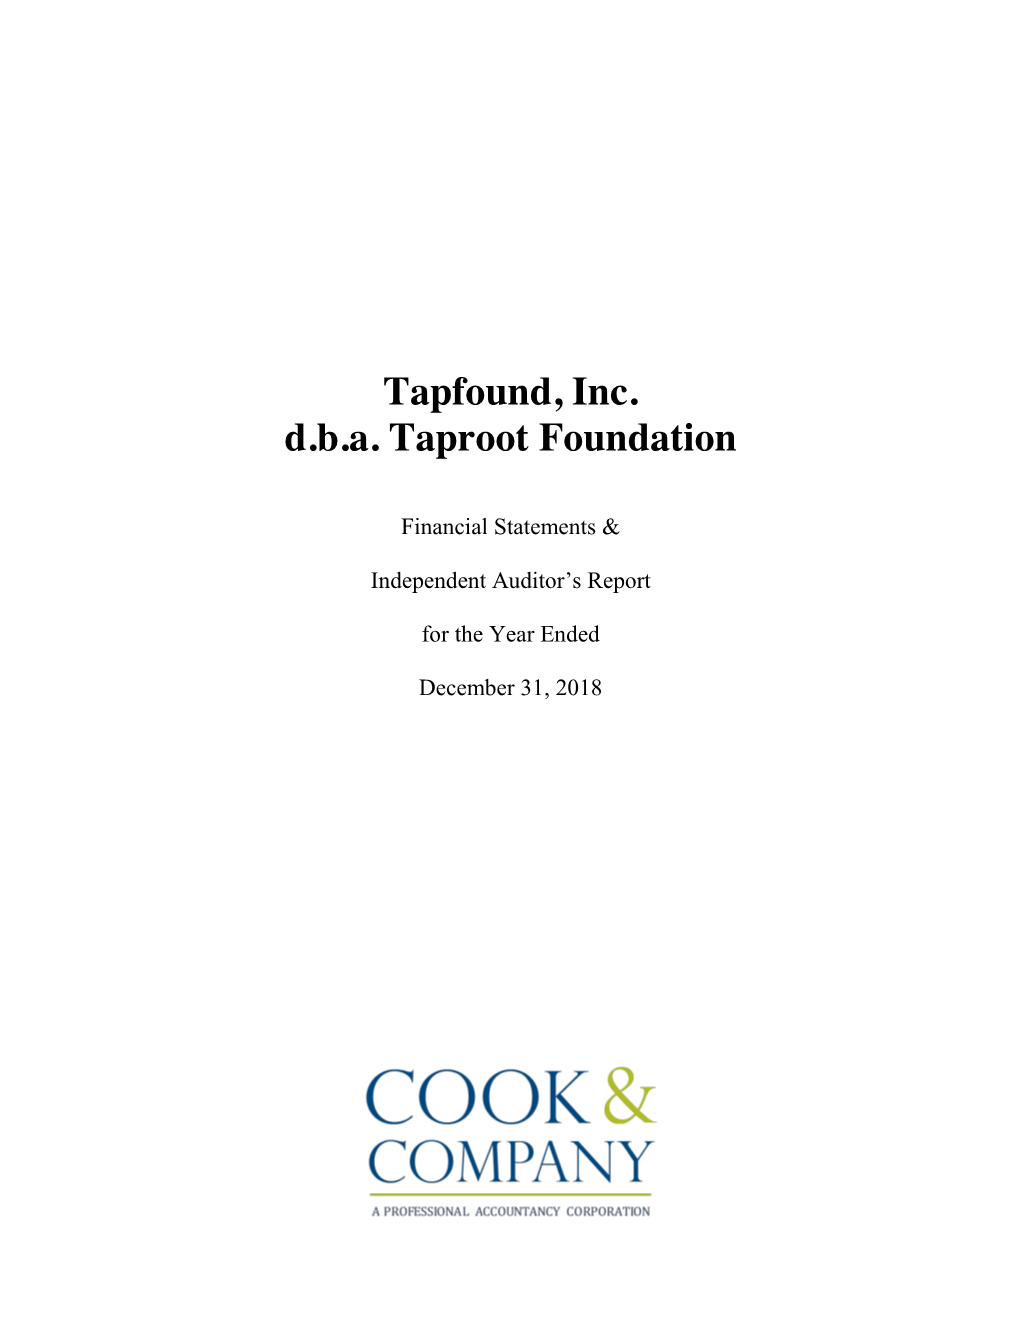 Tapfound, Inc. D.B.A. Taproot Foundation